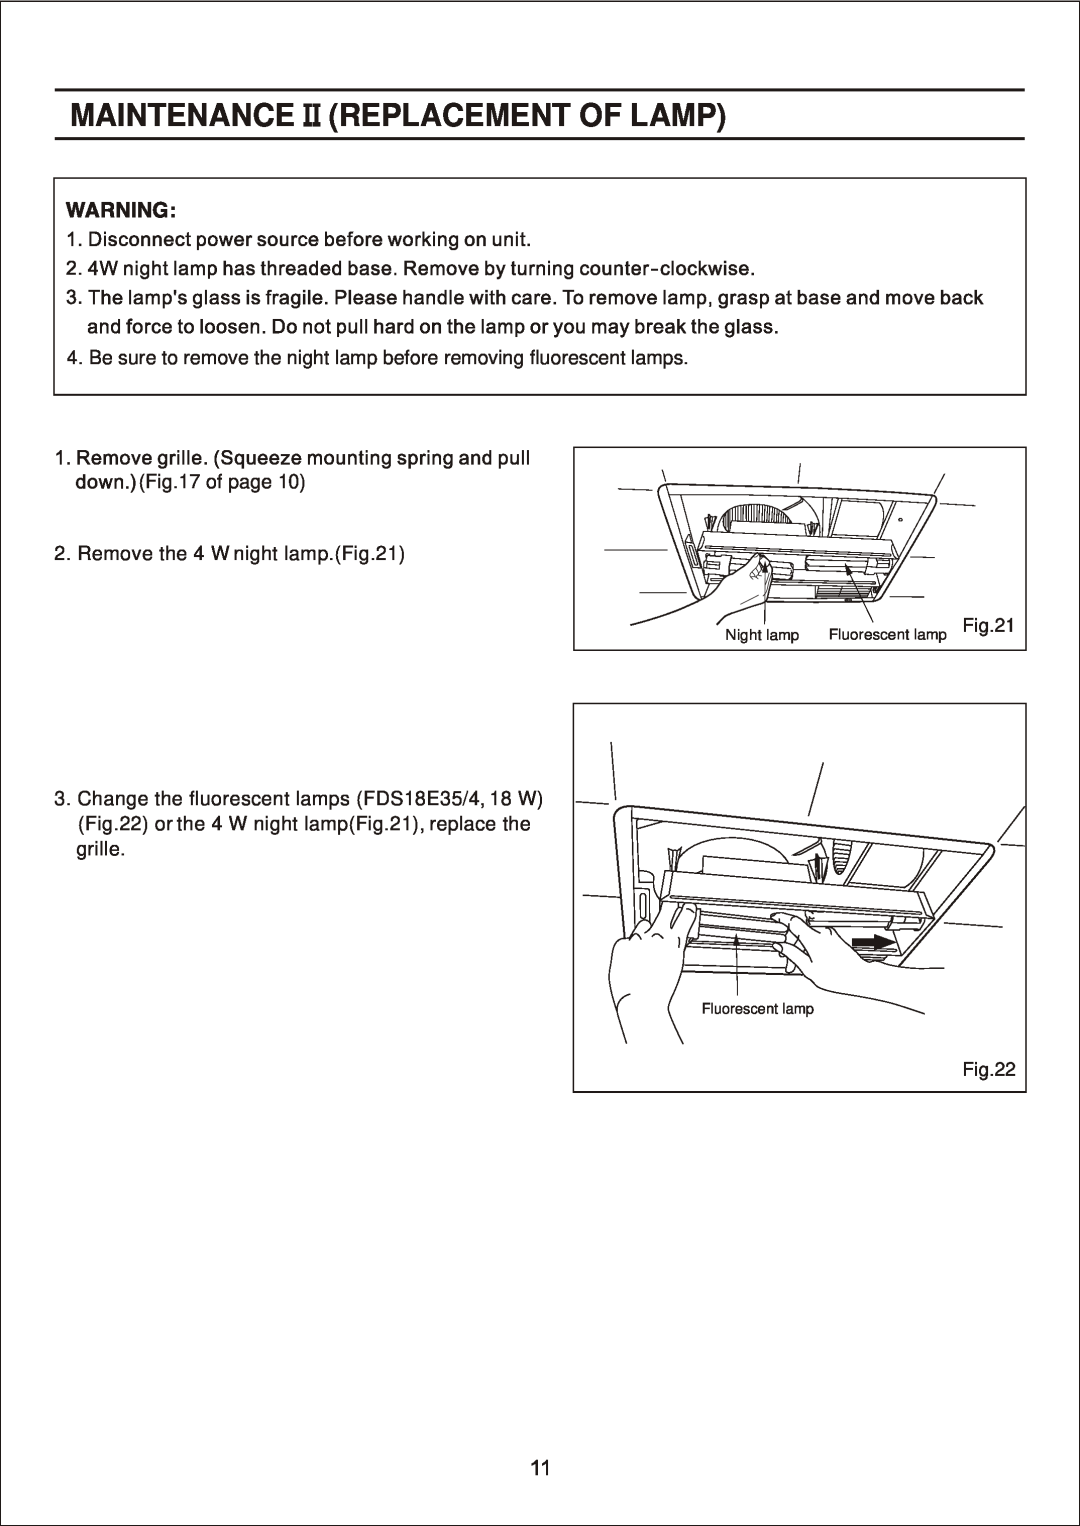 Panasonic FV-11VH2 manual Maintenance Replacement Of Lamp, of page 2. Remove the 4 W night lamp 